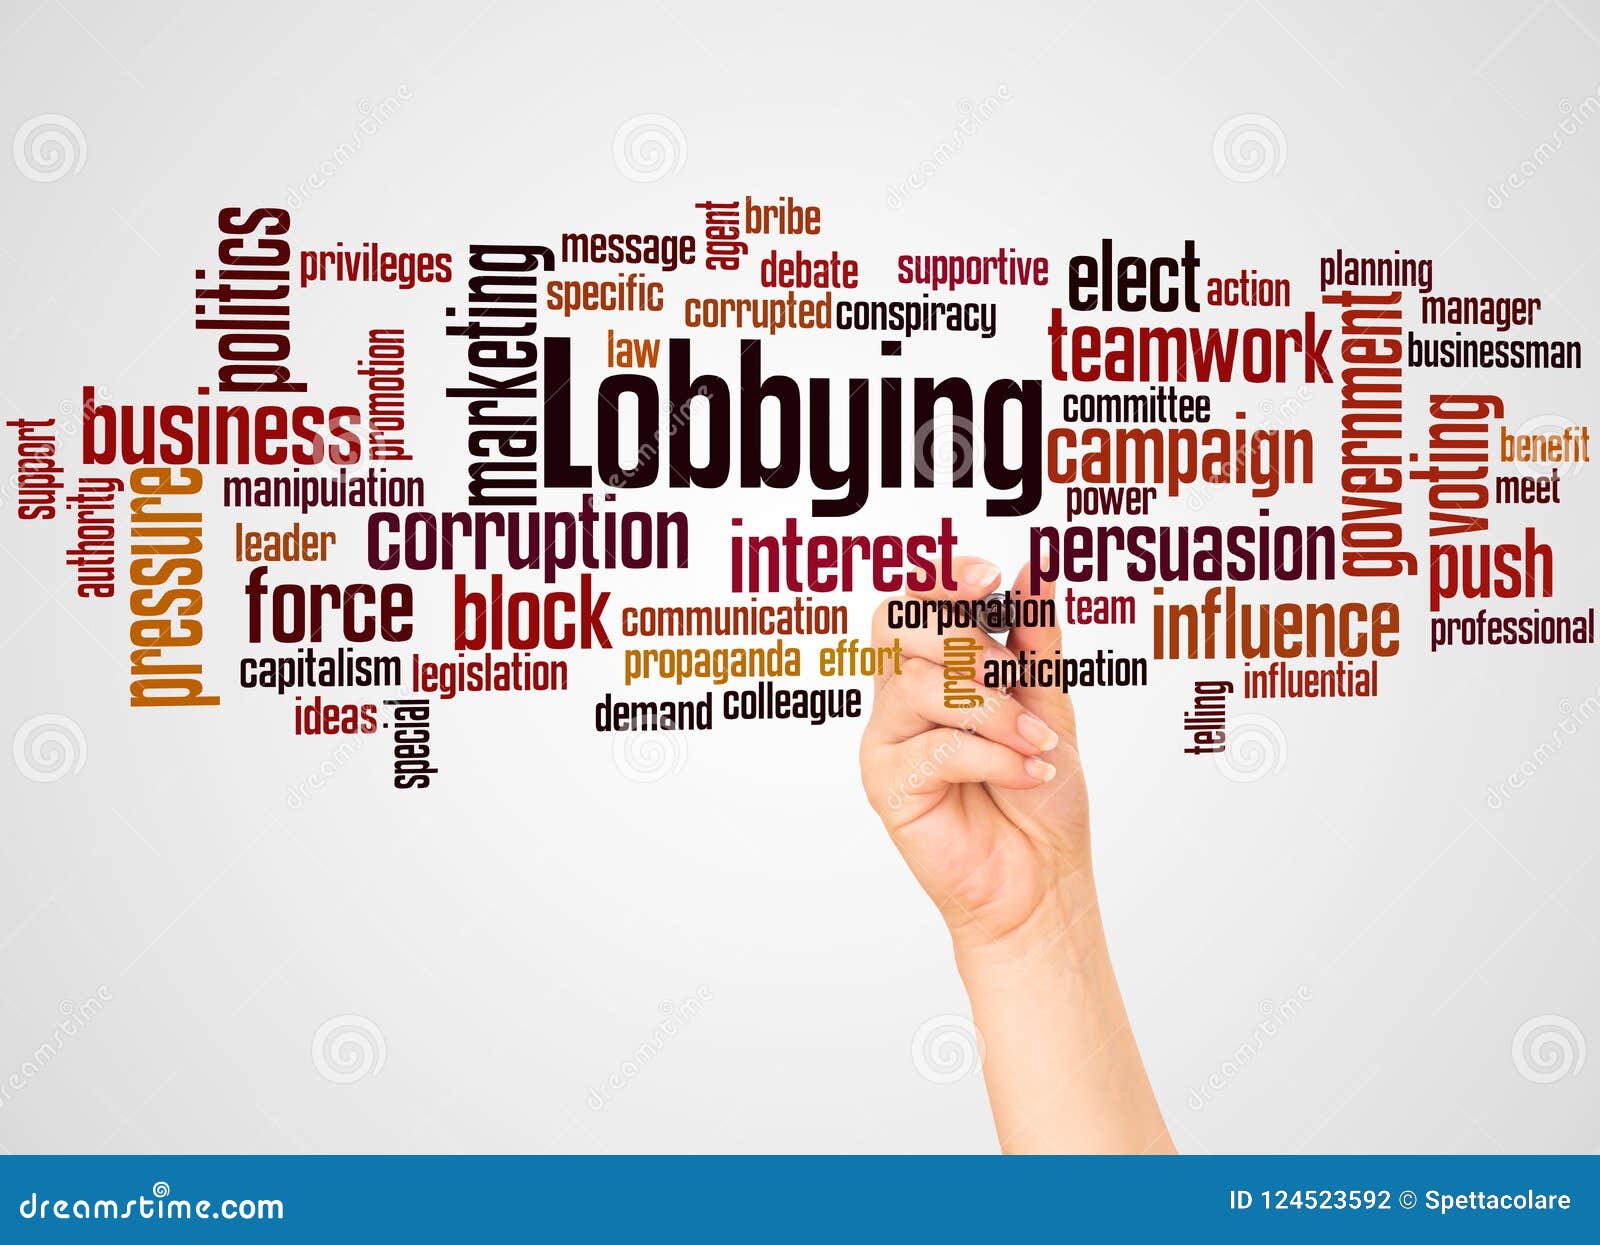 lobbying word cloud and hand with marker concept